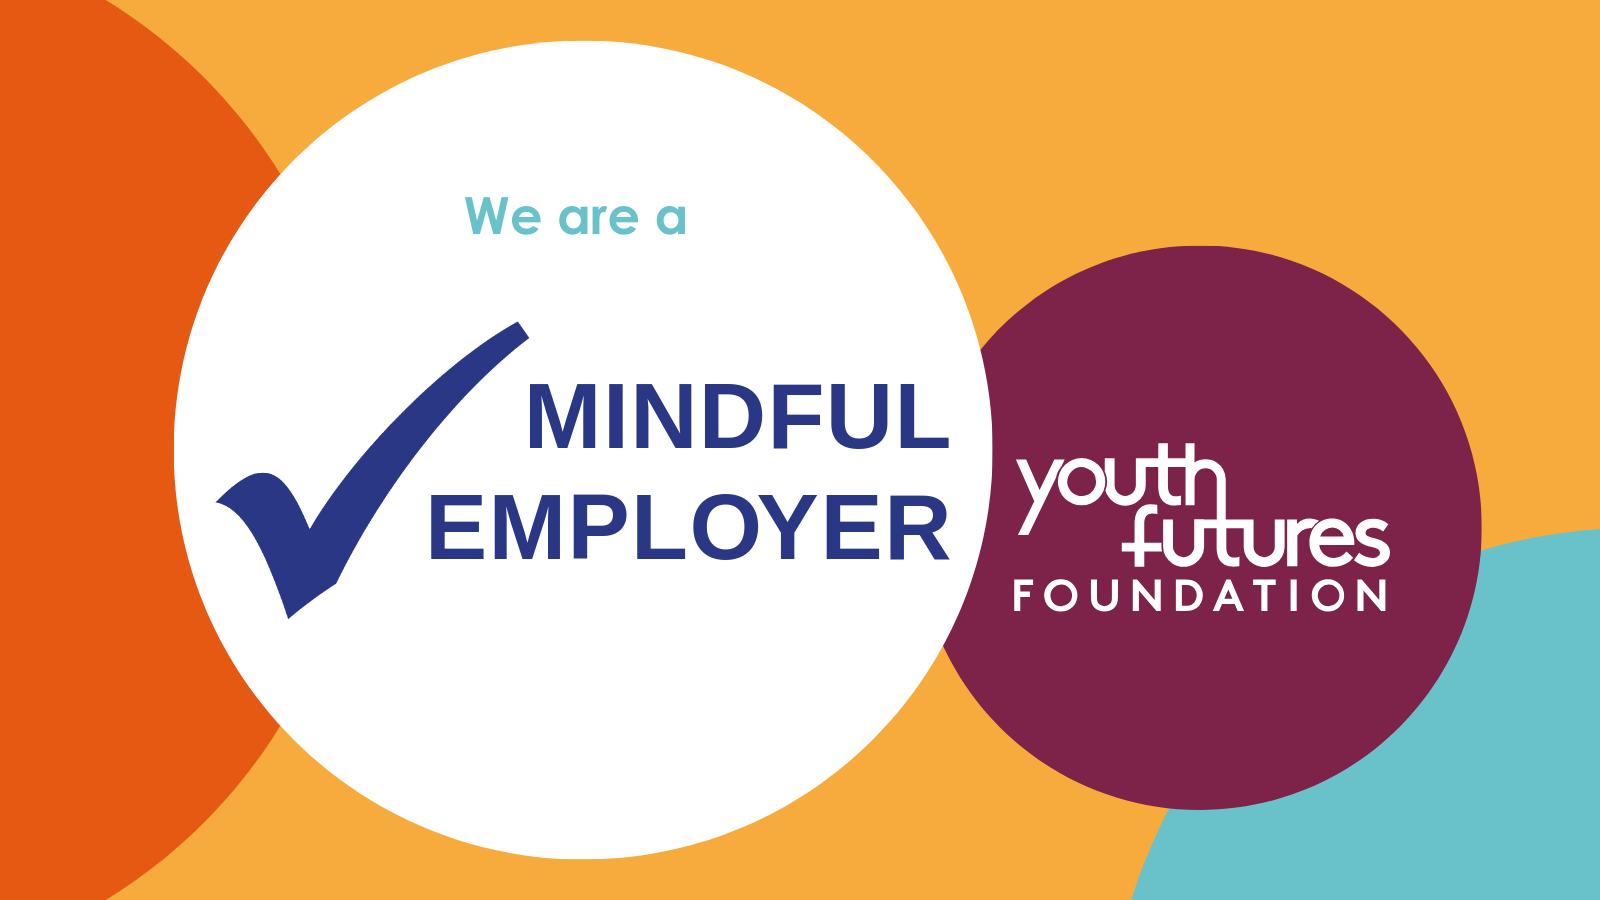 Youth Futures Foundation and Mindful Employer logo